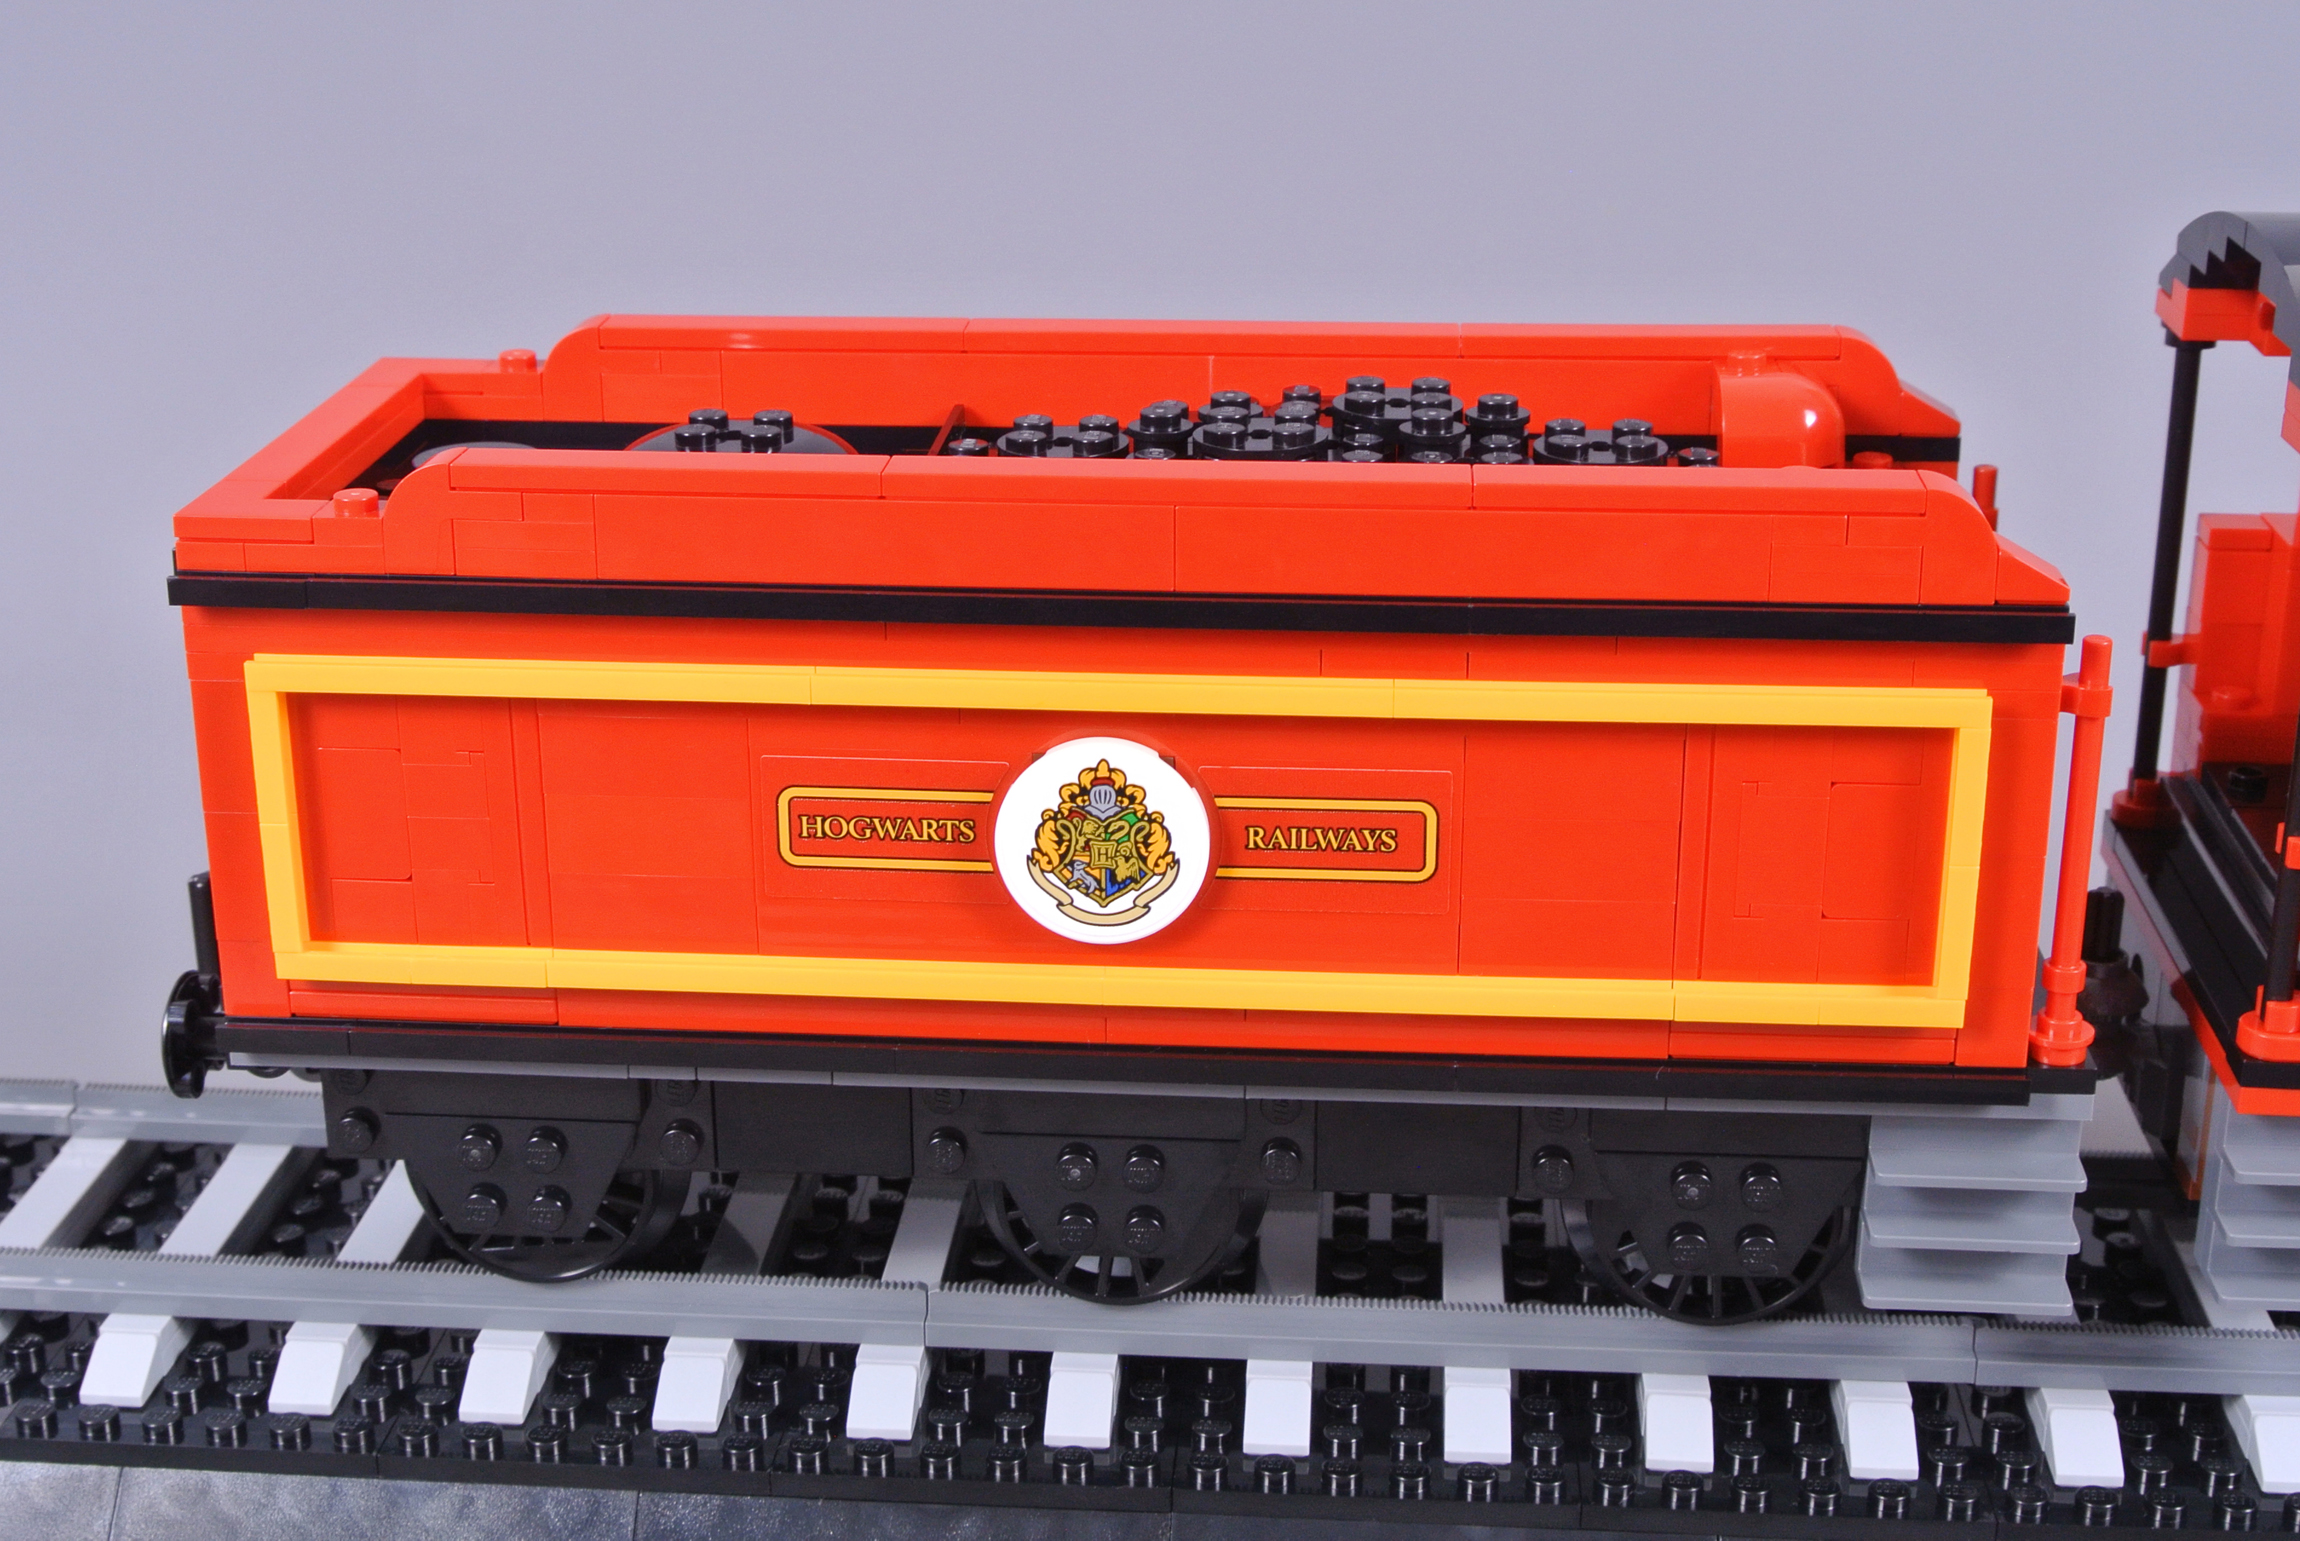 LEGO 76405 Hogwarts Express Collectors' Edition officially